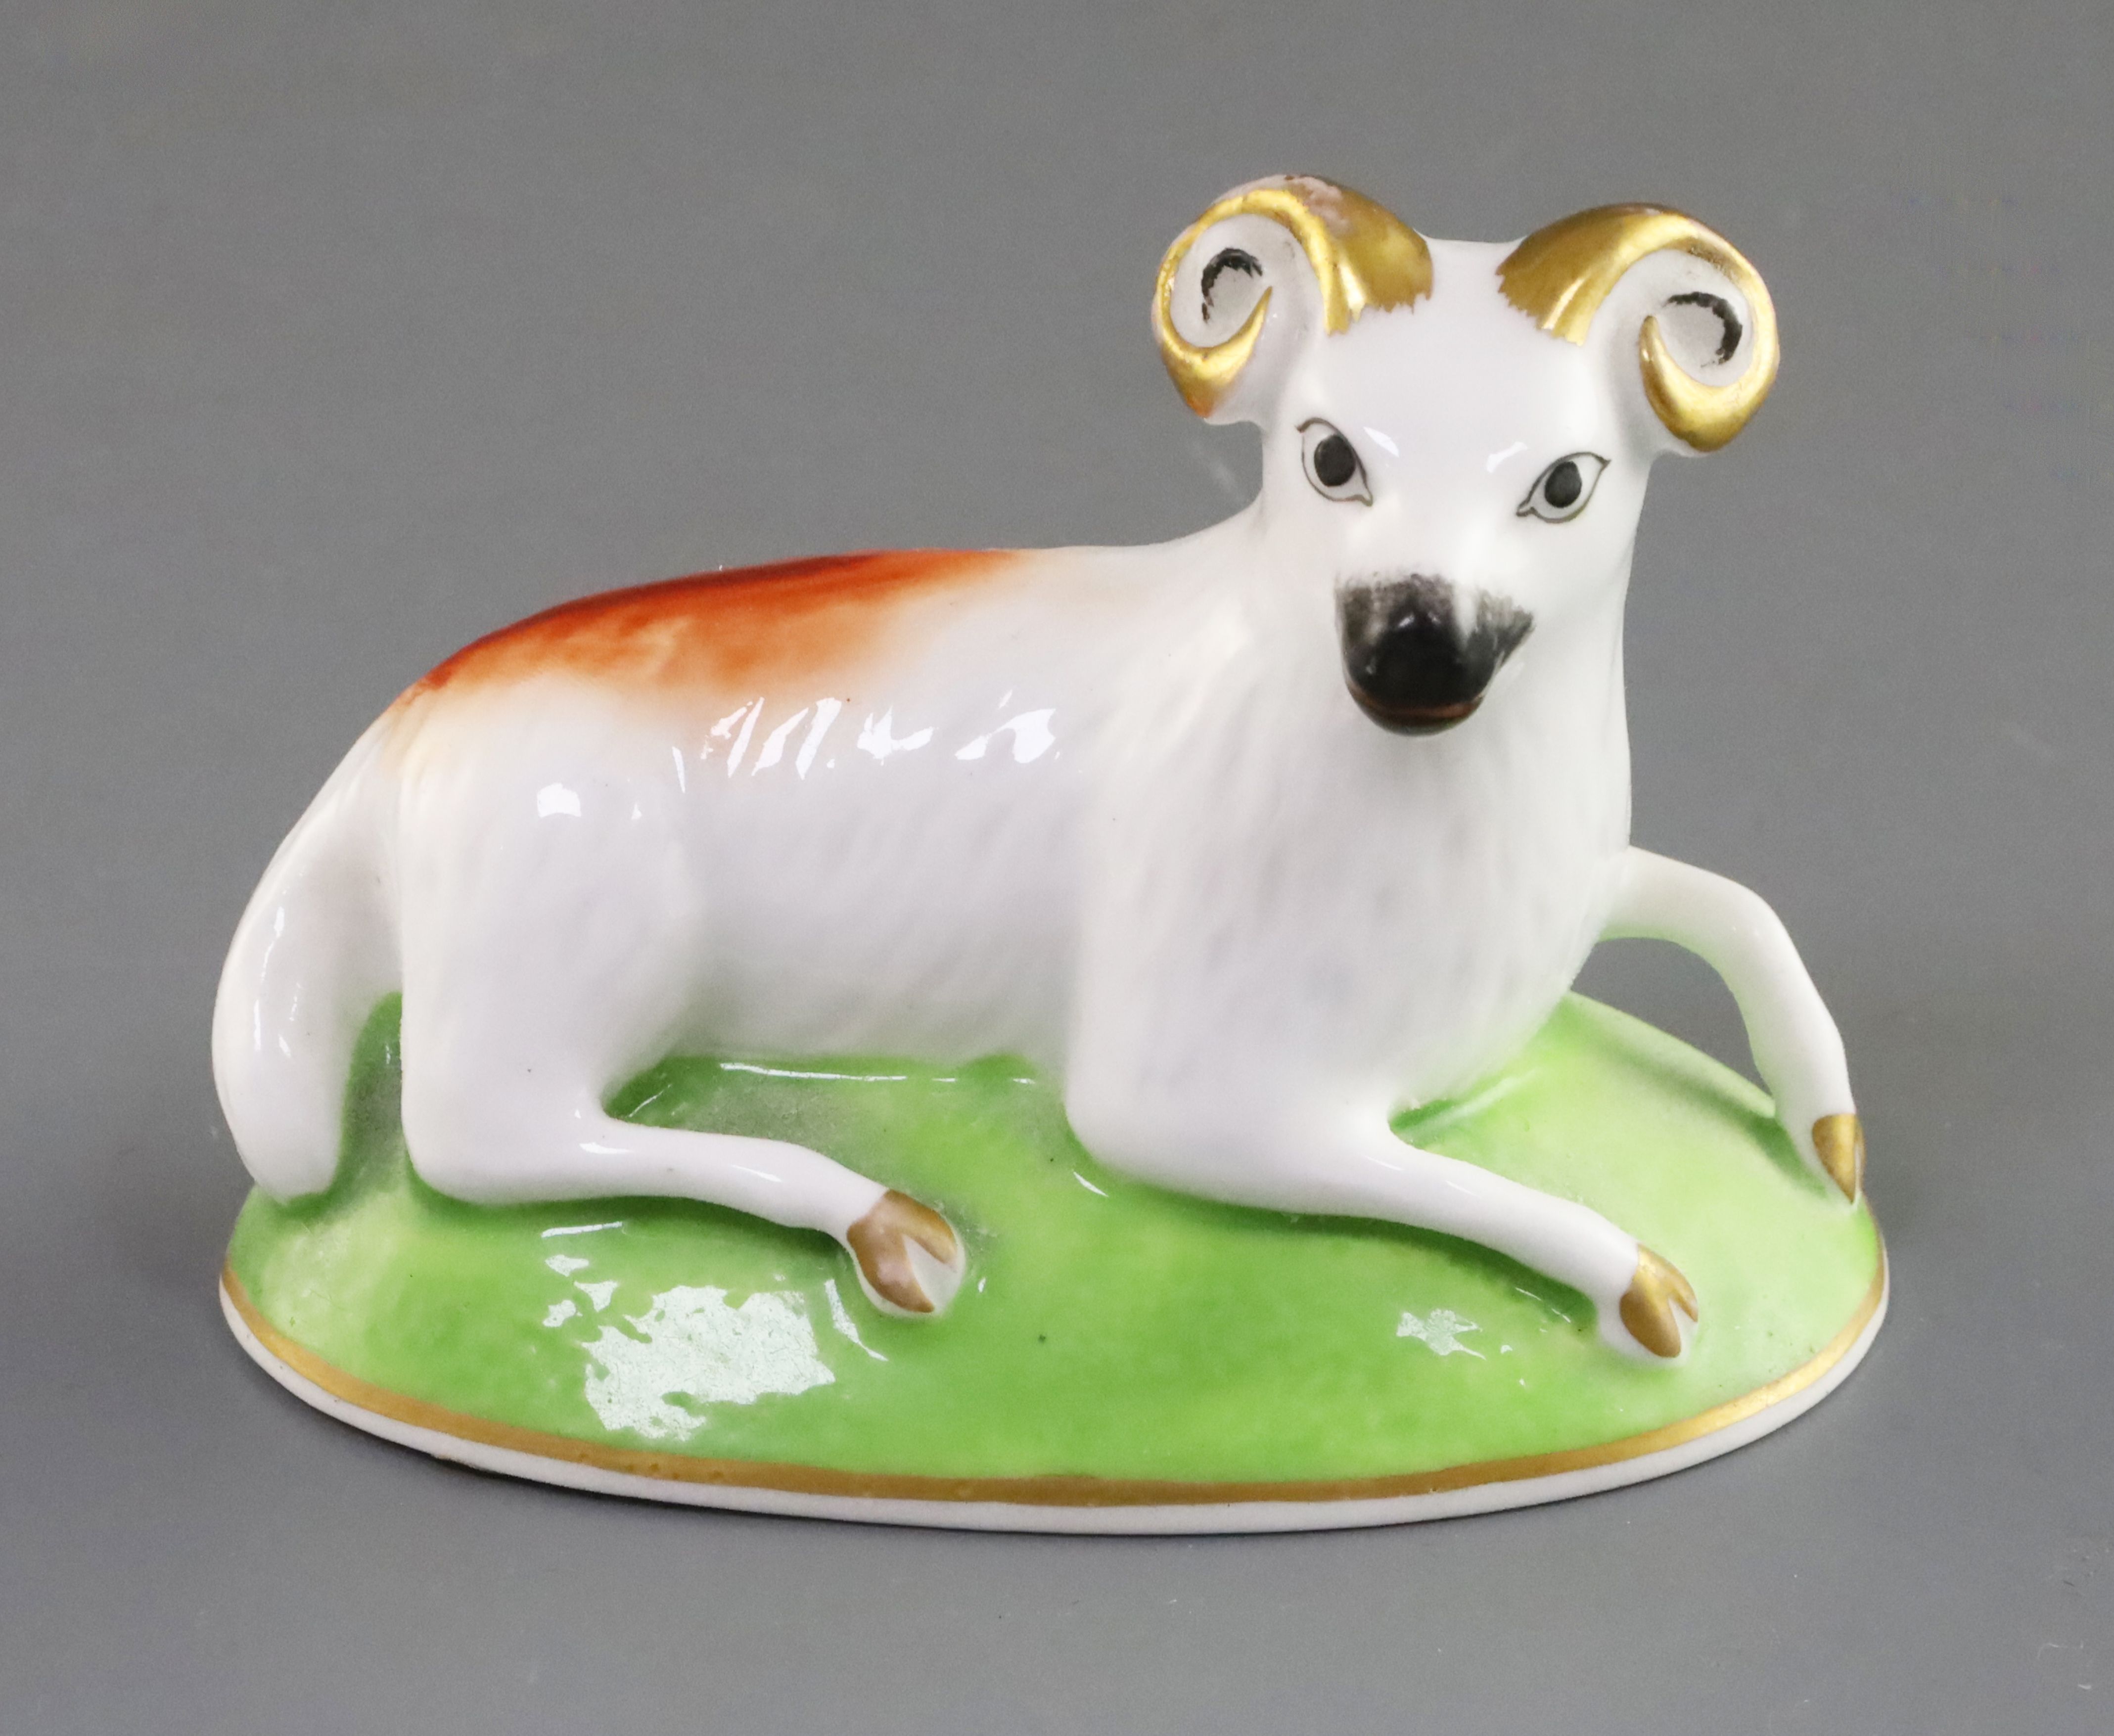 A Charles Bourne porcelain figure of a ram, c.1817-30, recumbent on green oval mound base,